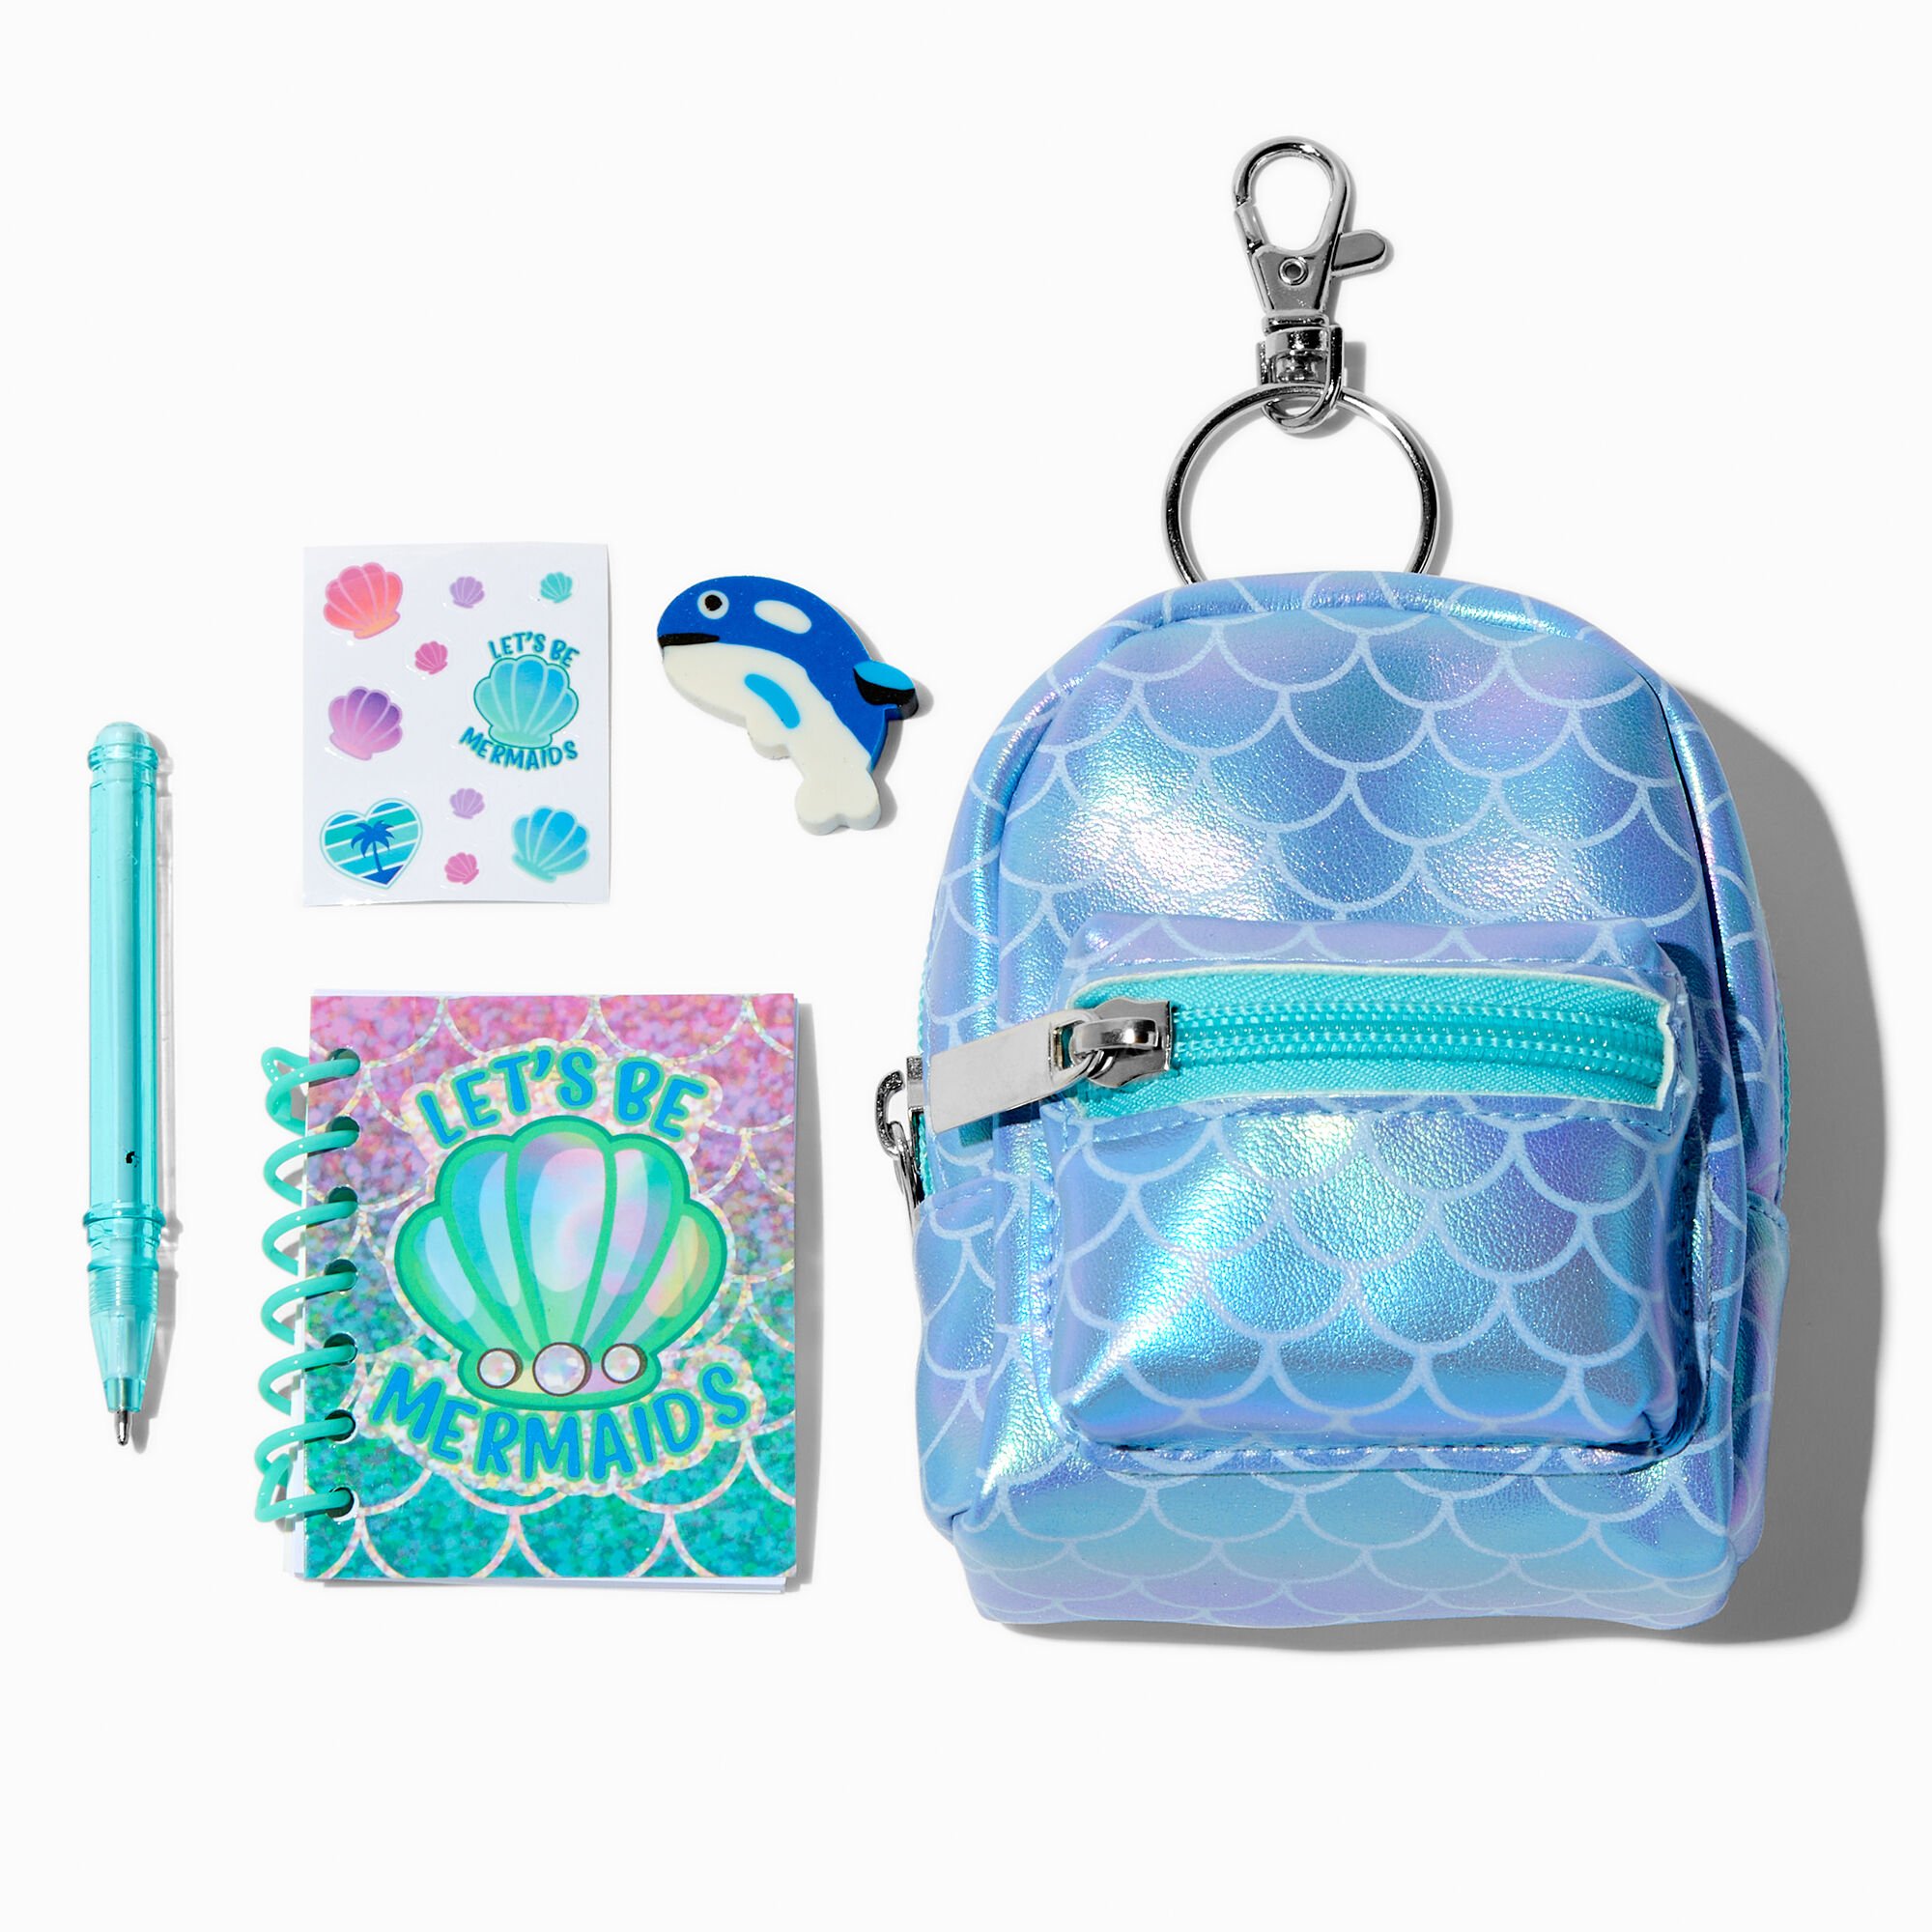 View Claires Critter Mermaid 4 Backpack Stationery Set information